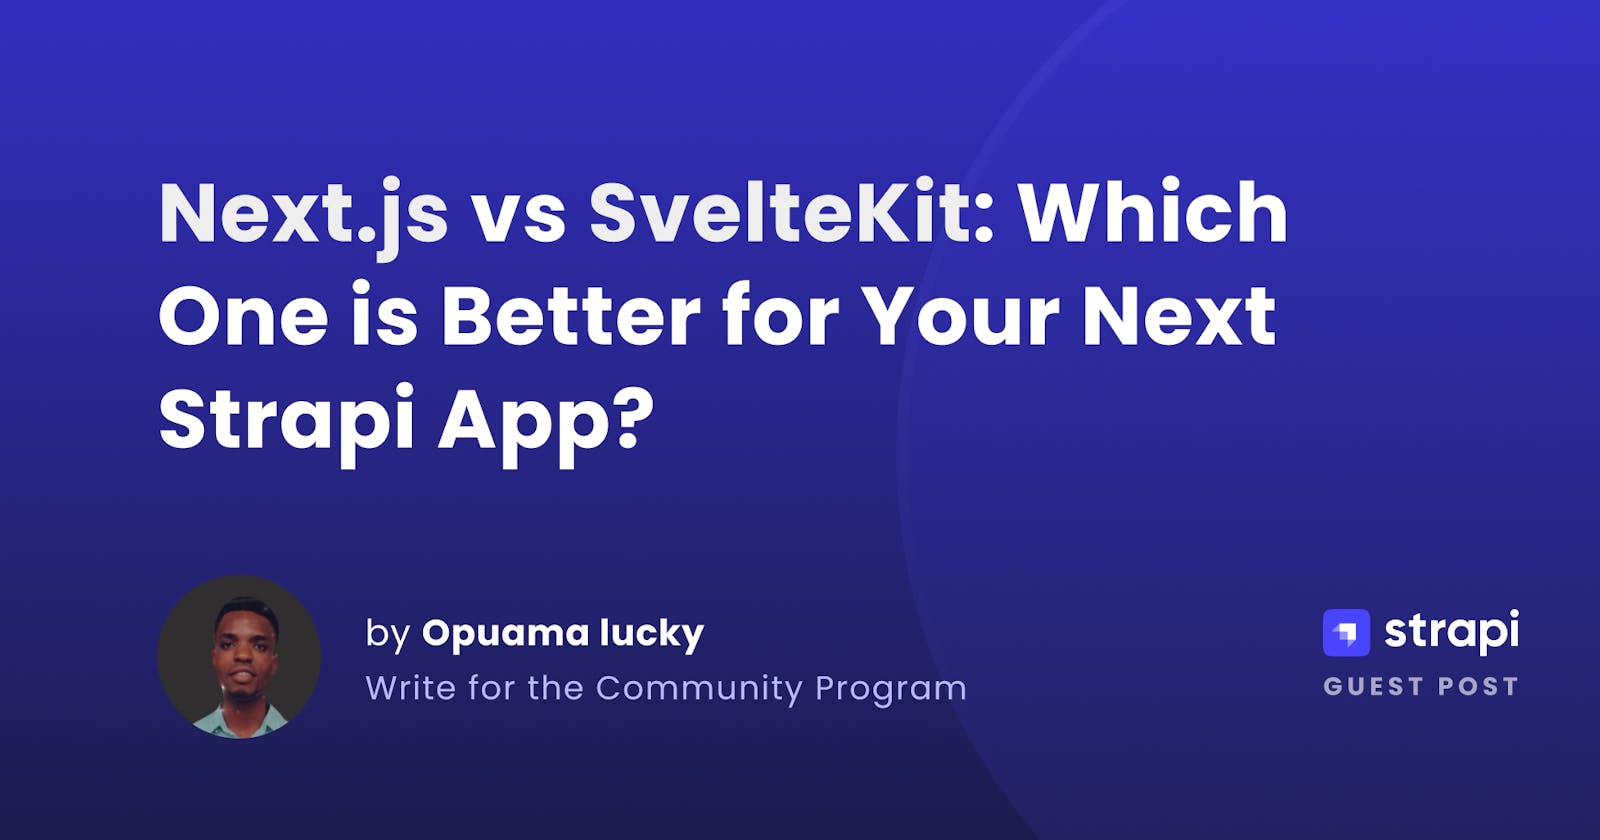 Next.js vs SvelteKit: Which One is Better for Your Next Strapi App